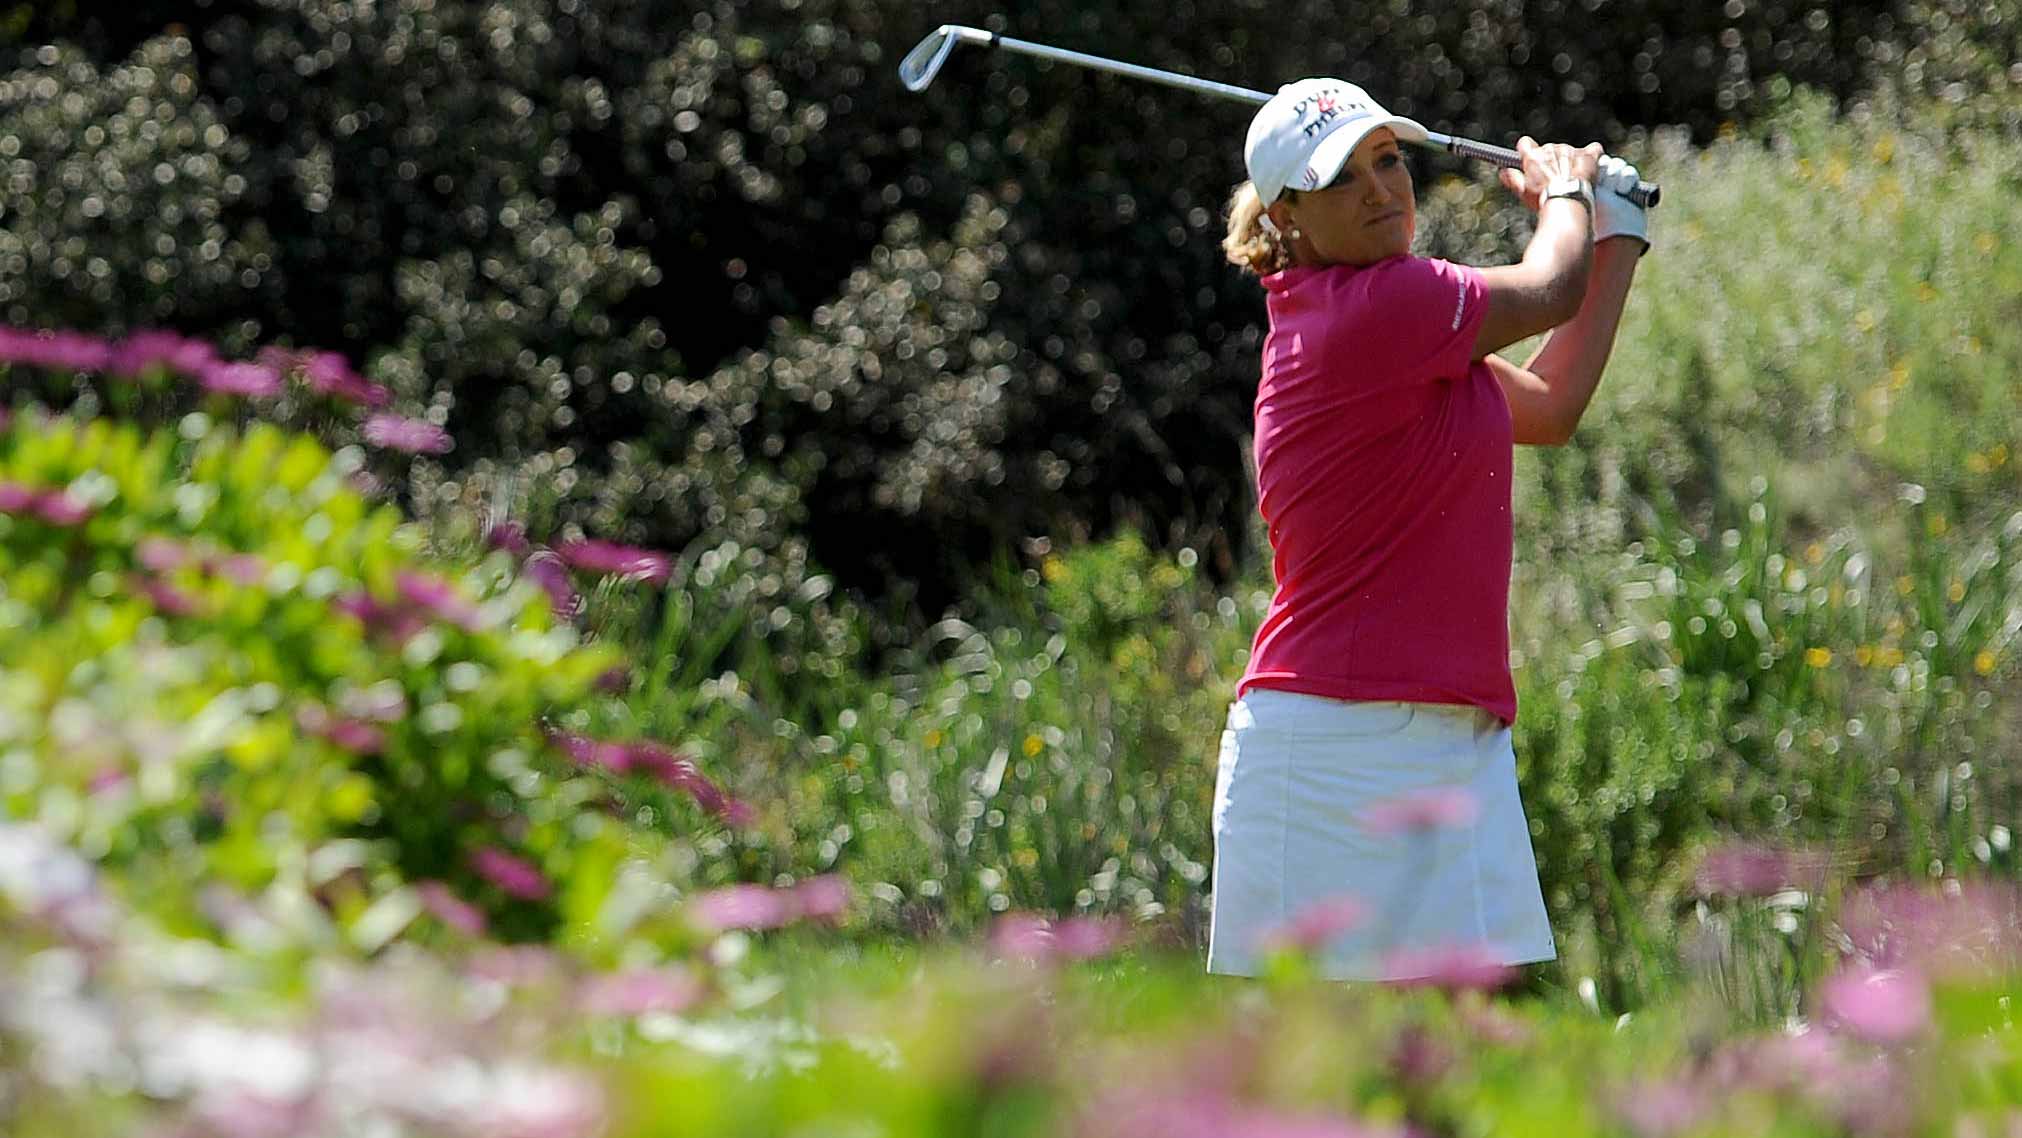 Cristie Kerr tees off the 3rd hole during Final Round of the LPGA KIA Classic at the Aviara Golf Club